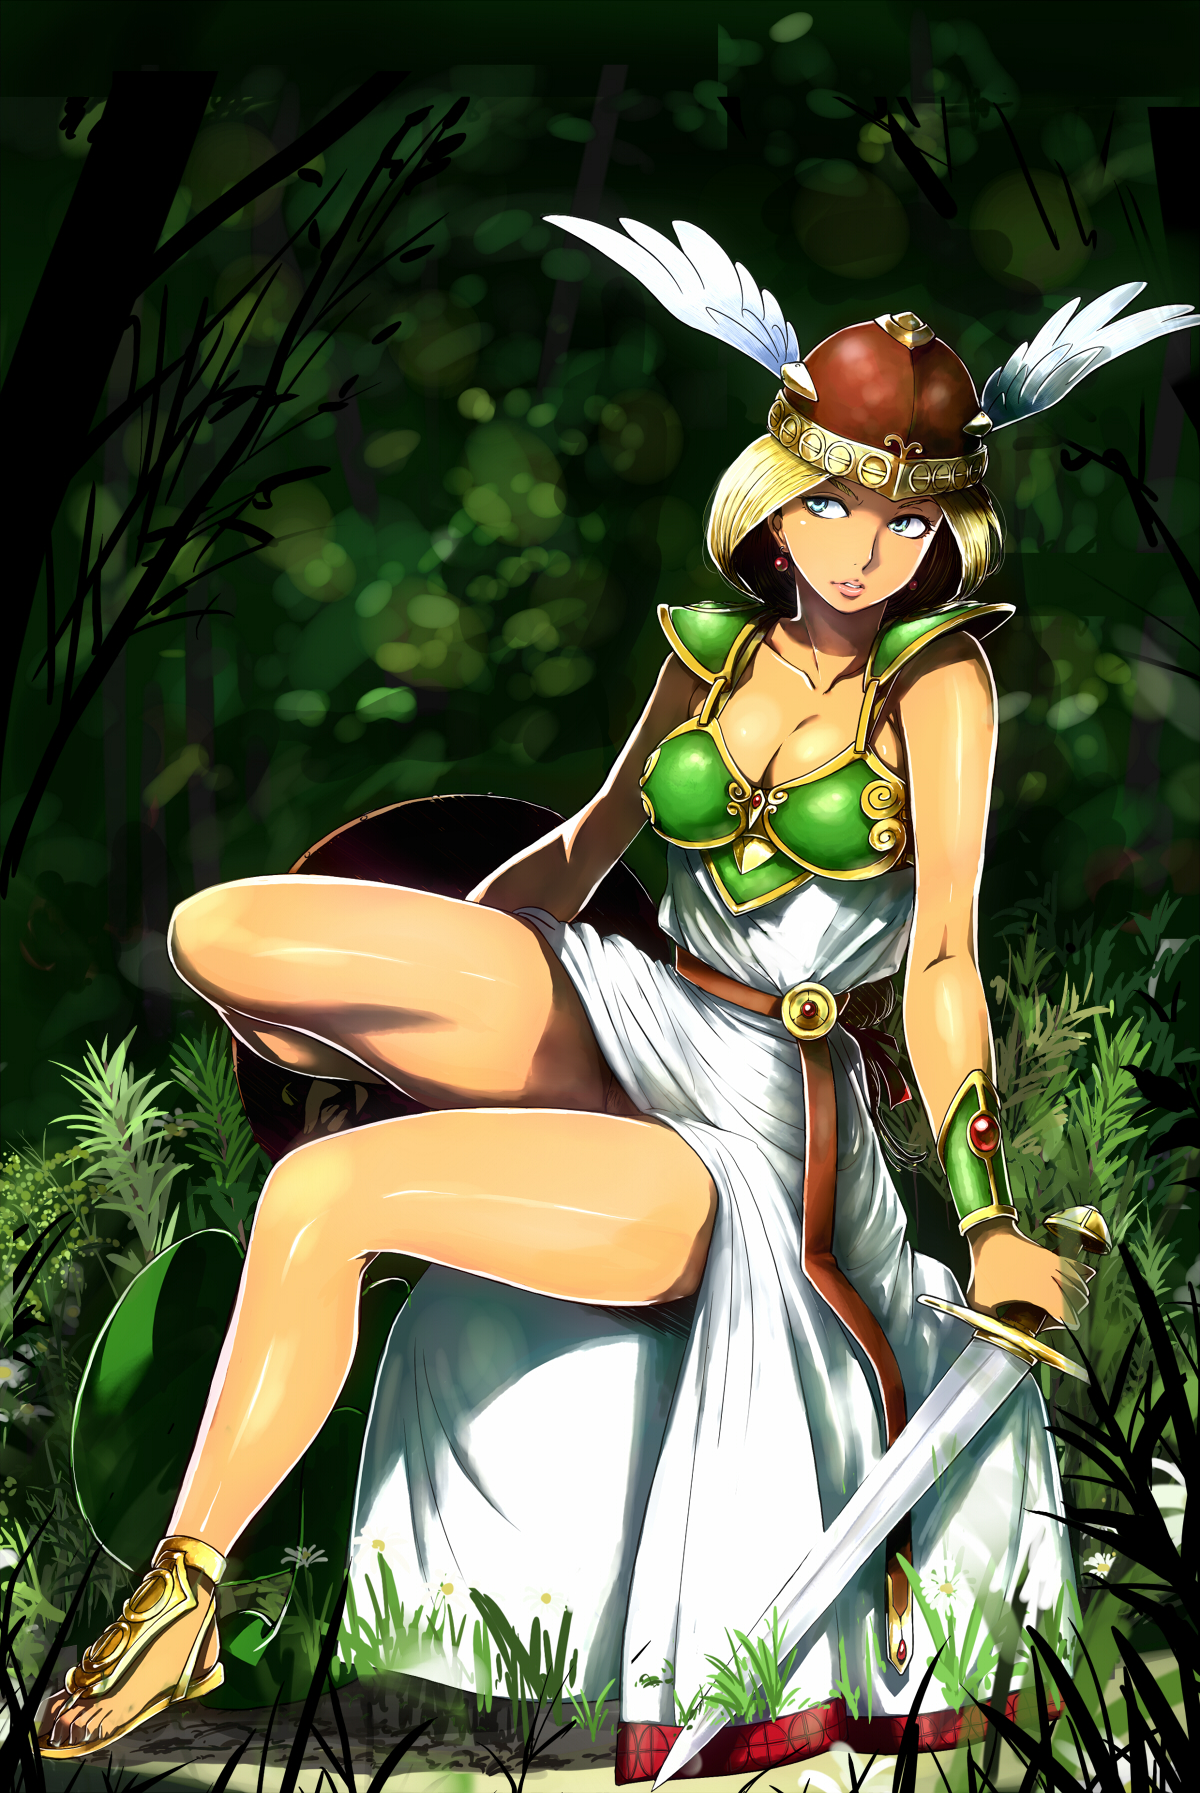 Anime 1200x1793 bikini armor bikini The Legend of Valkyrie Valkyrie (The Legend of Valkyrie) armor blonde cleavage collarbone dress earring forest helmet jewelry legs long hair sandals shoulder pads sitting sword thighs weapon outdoors